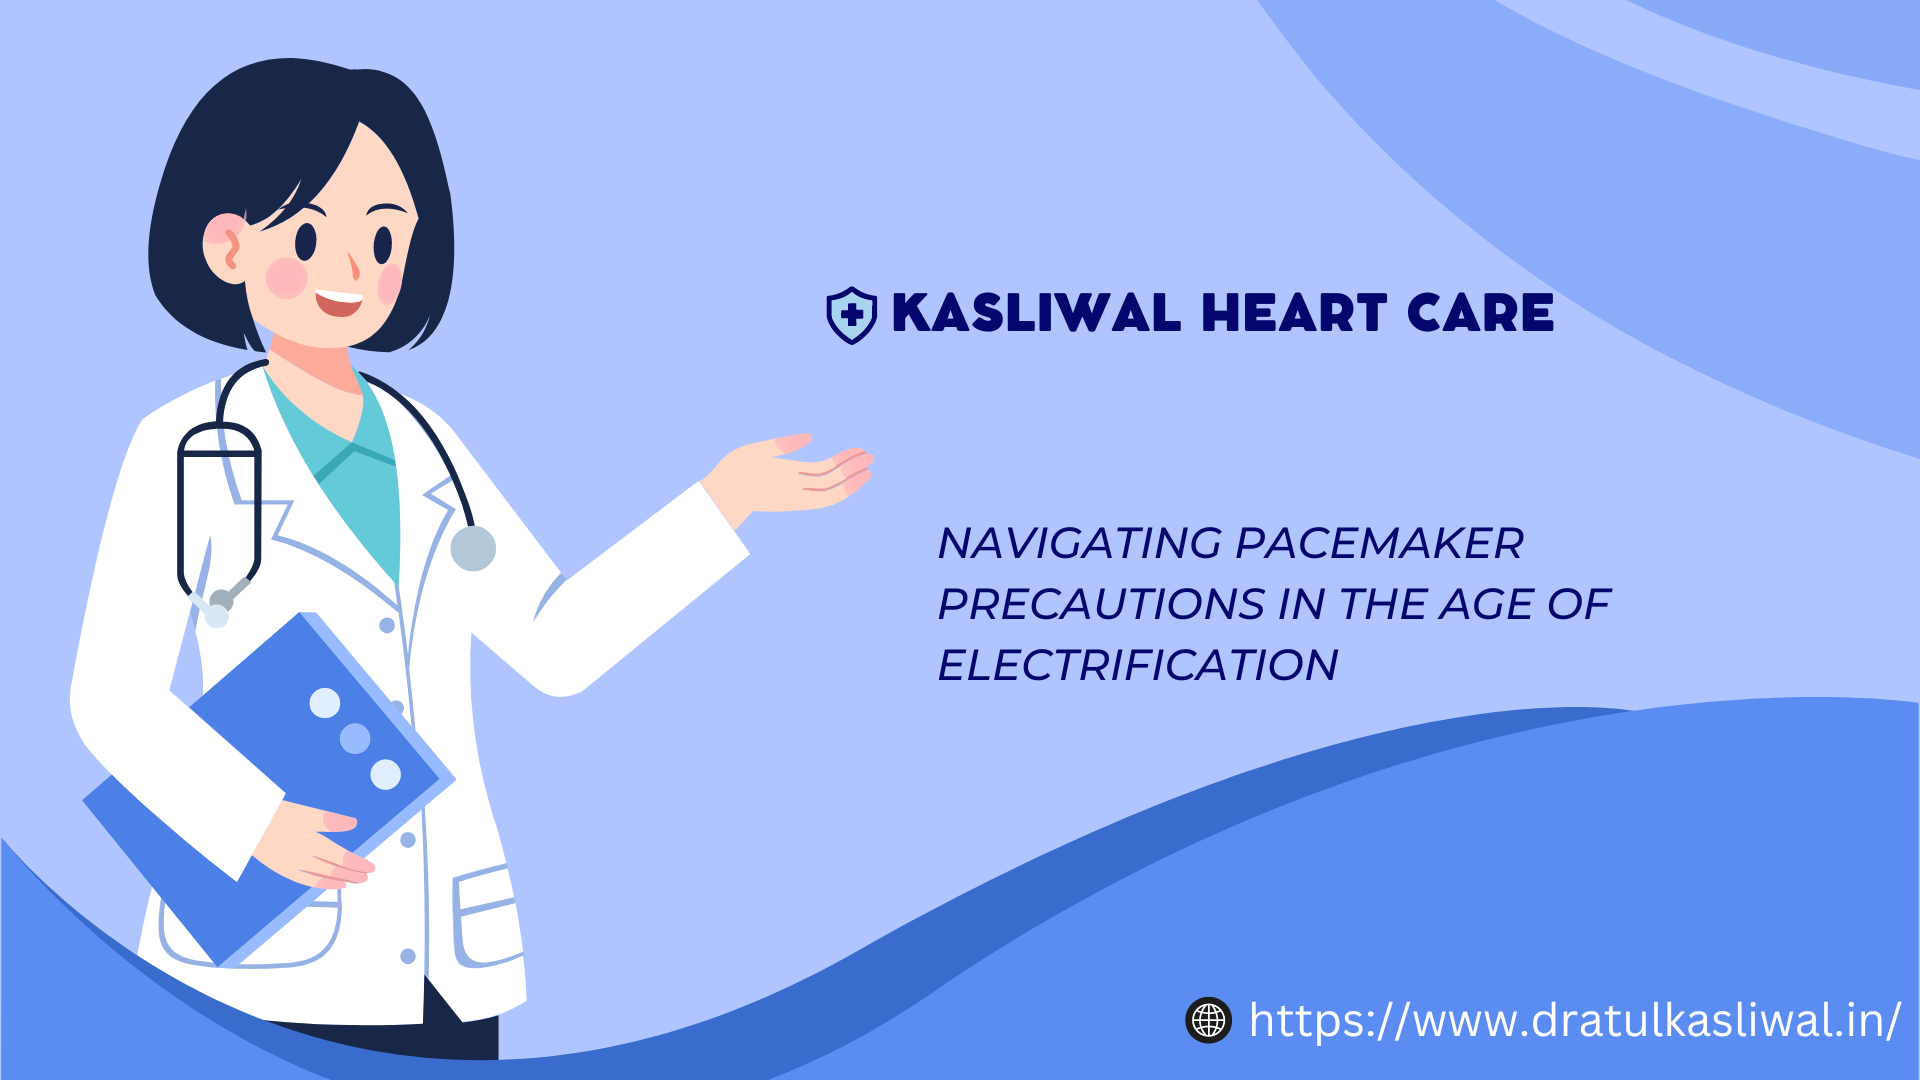 Navigating Pacemaker Precautions in the Age of Electrification